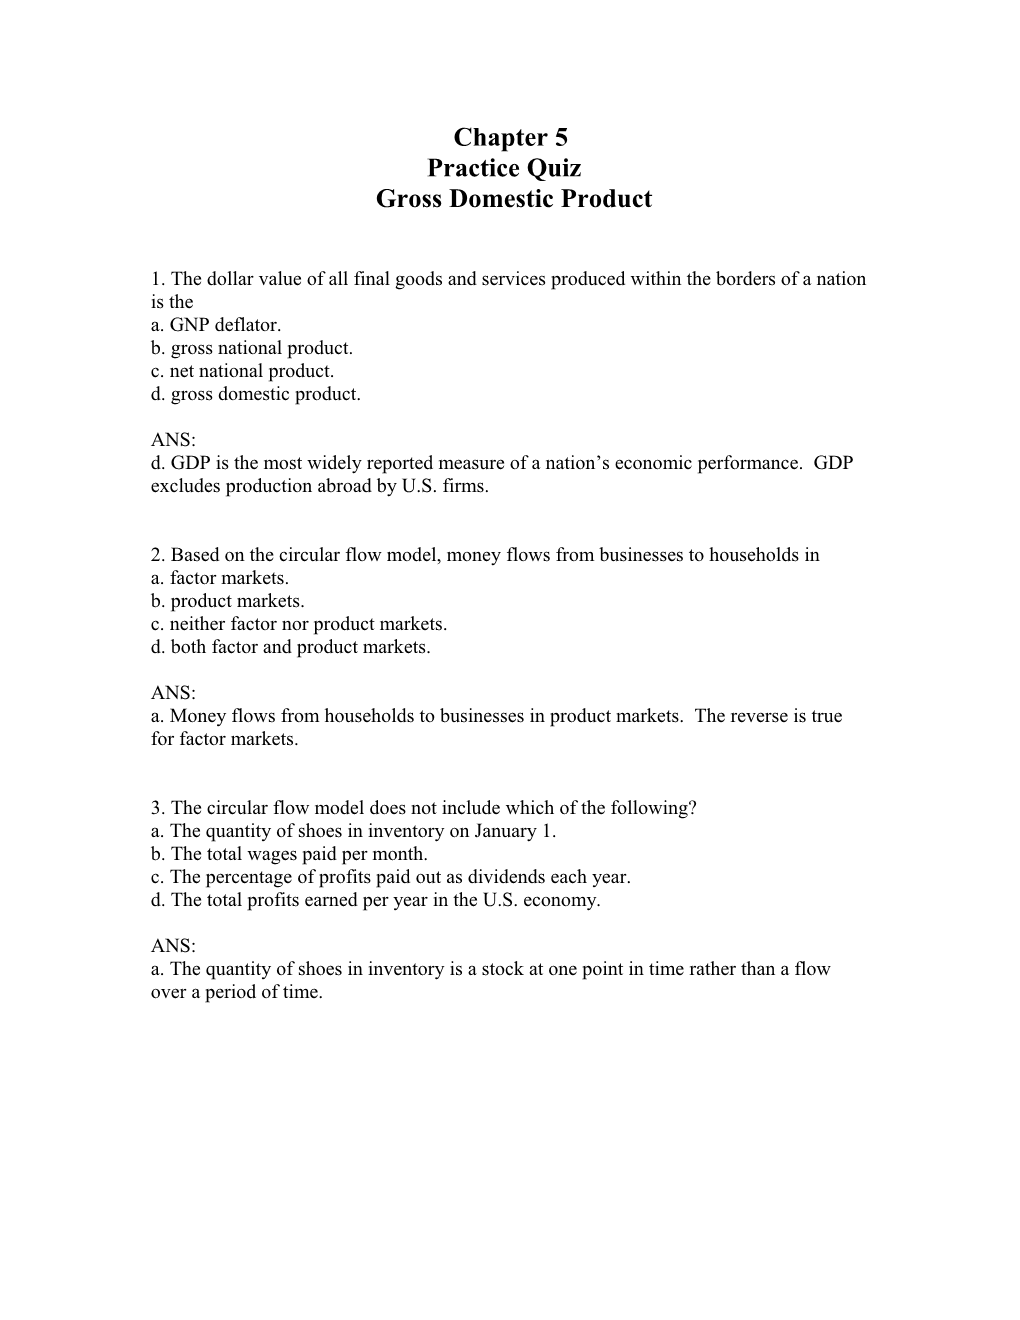 Chapter 5 Practice Quiz Gross Domestic Product